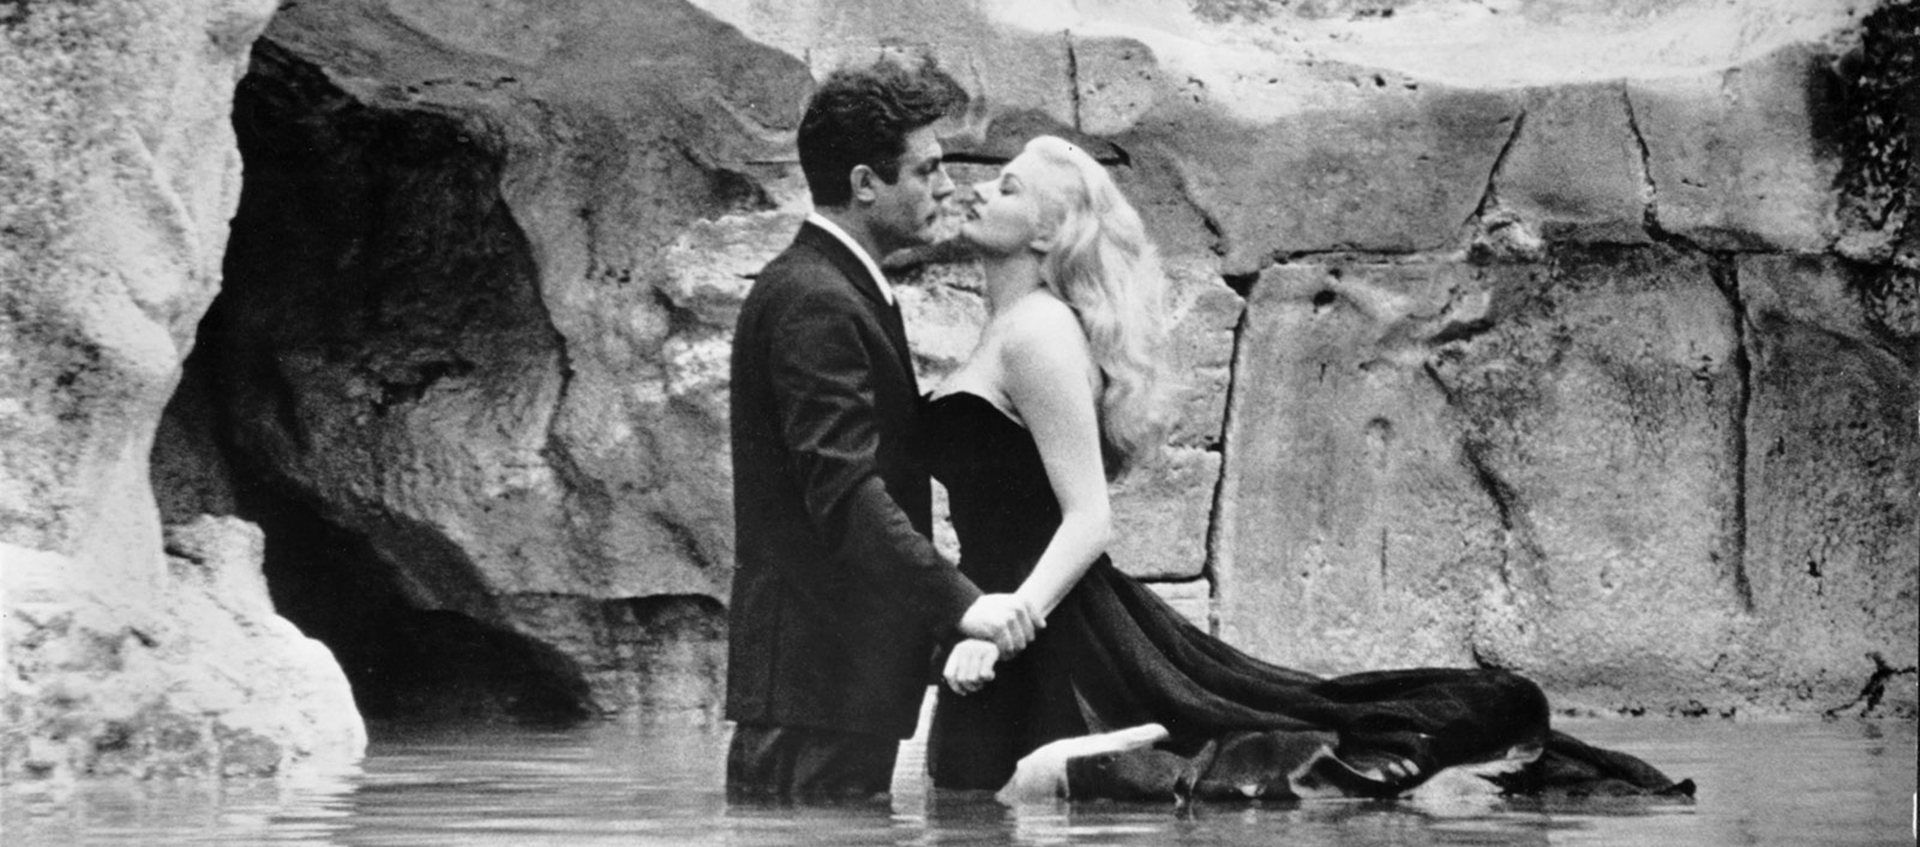 Black-and-white still of Marcello (Marcello Mastroianni) and Sylvia (Anita Ekberg) standing in the Trevi Fountain, facing each other. Marcello (left) has short dark hair, is wearing a dark suit, and is gripping Sylvia’s wrist. Sylvia (right) has long blonde hair and is wearing a dark ballgown that is floating in the water behind her.